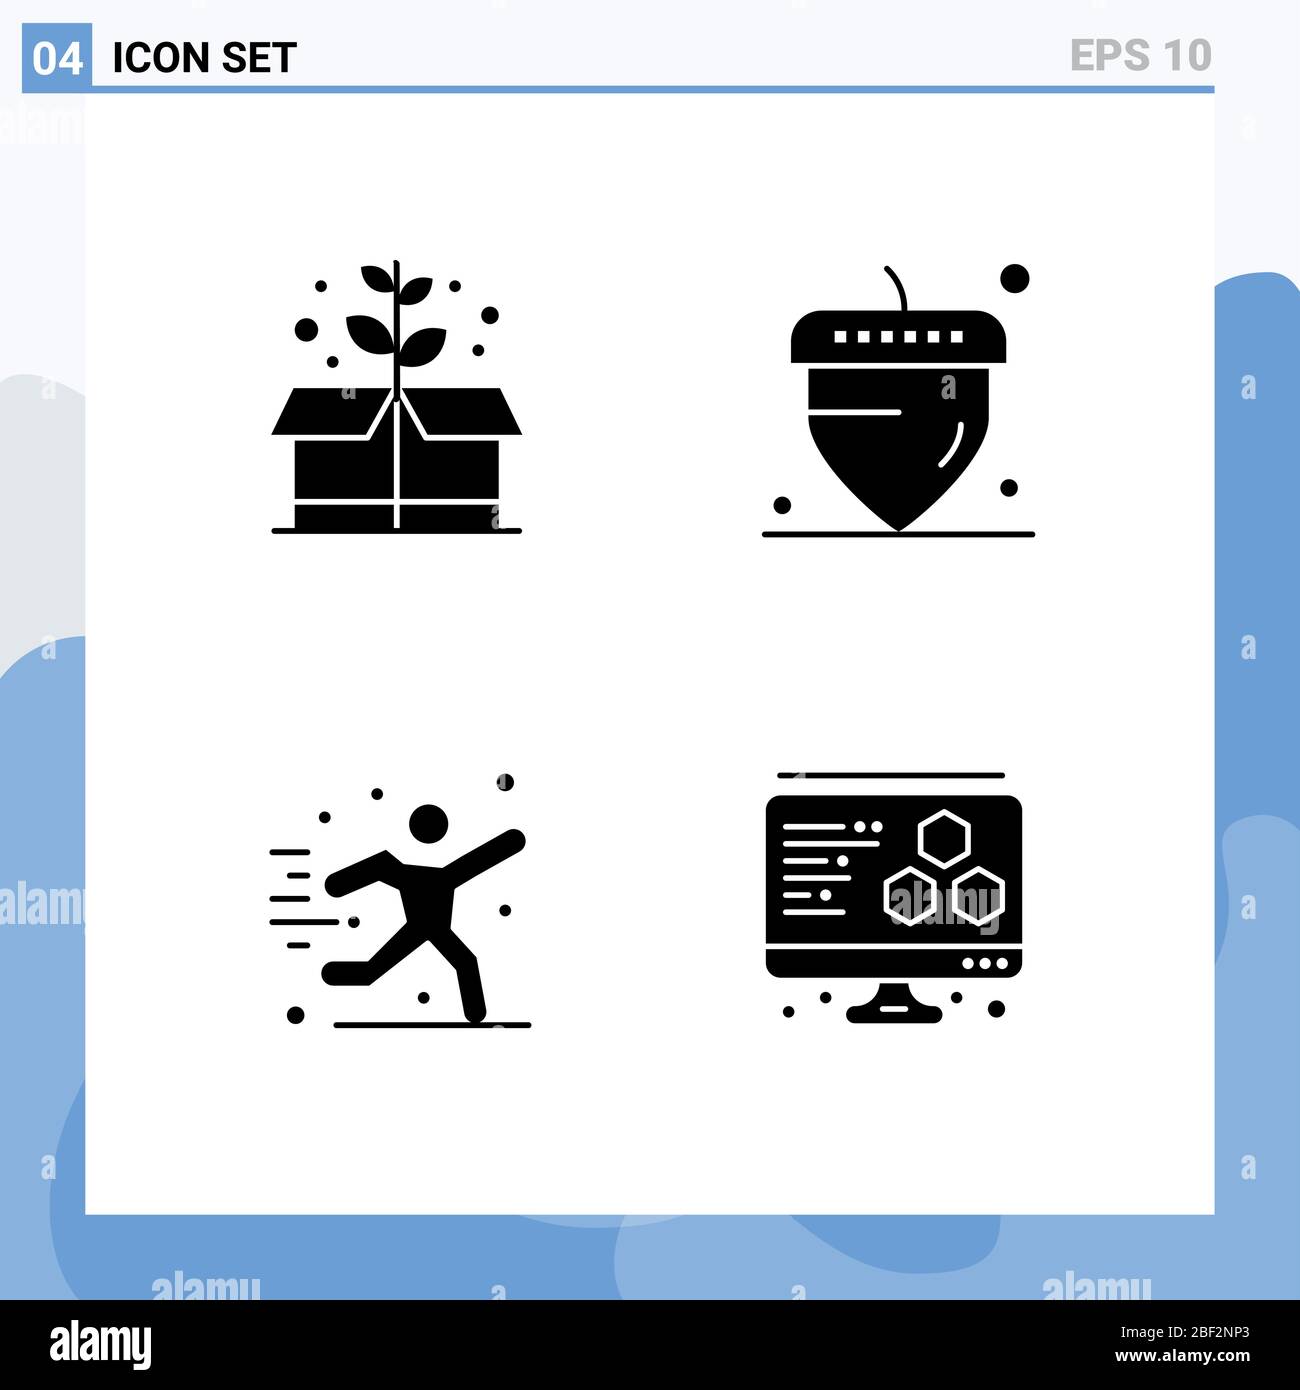 Mobile Interface Solid Glyph Set of 4 Pictograms of earth day, football, acorn, hobbies, computer Editable Vector Design Elements Stock Vector